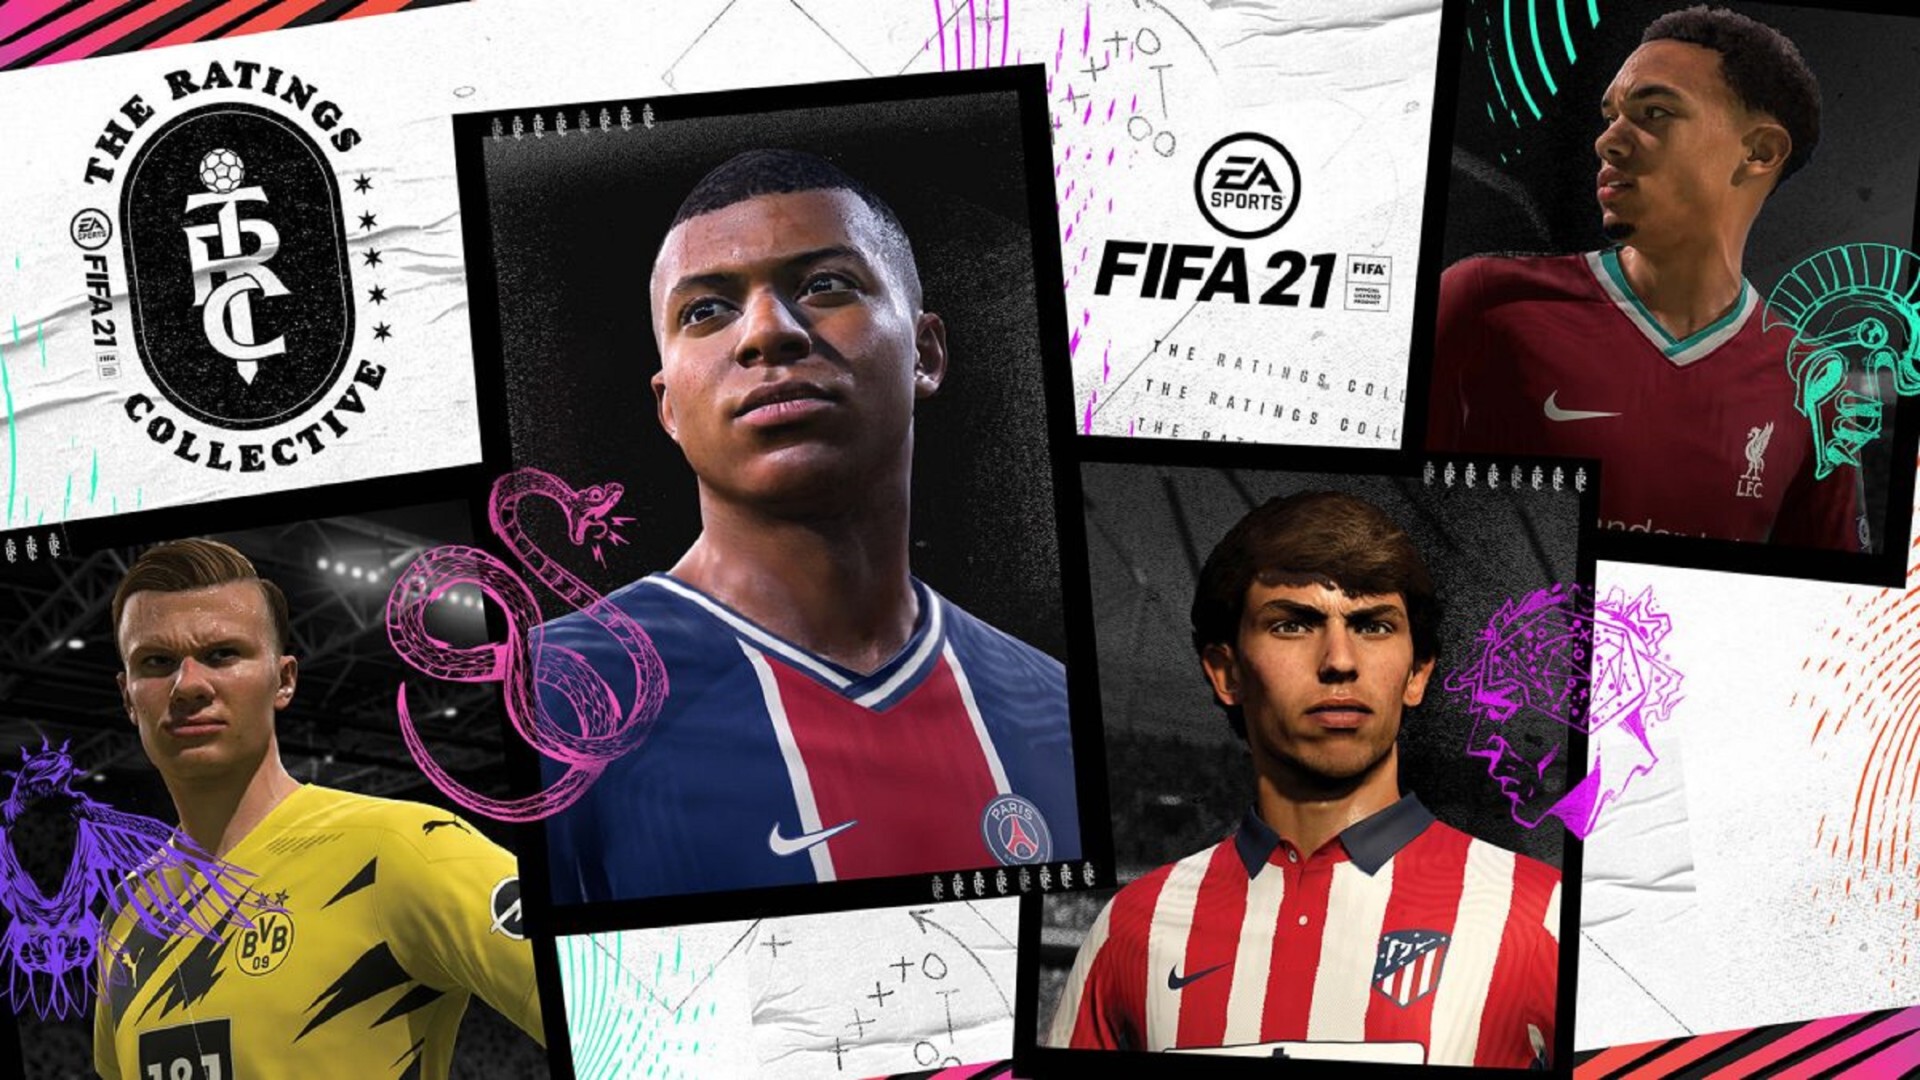 FIFA 21 has free drops on Prime Gaming